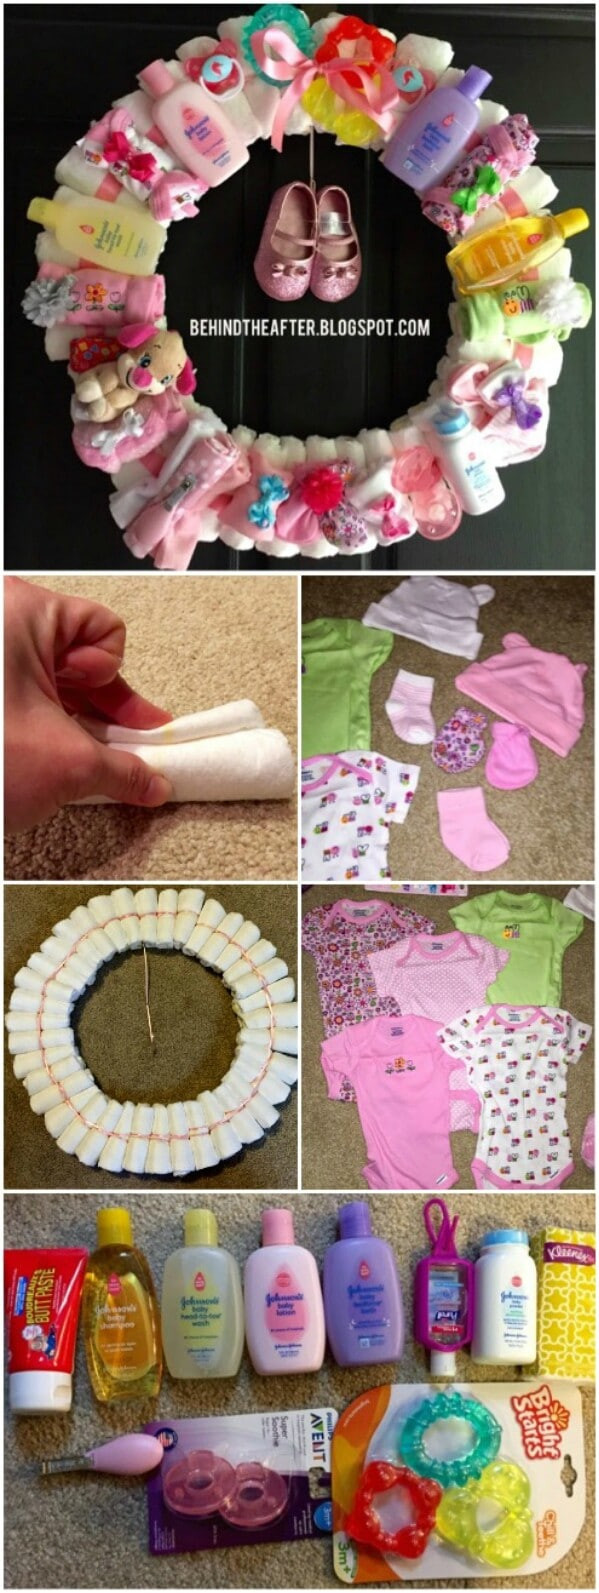 DIY Baby Shower Gifts For Girl
 25 Enchantingly Adorable Baby Shower Gift Ideas That Will